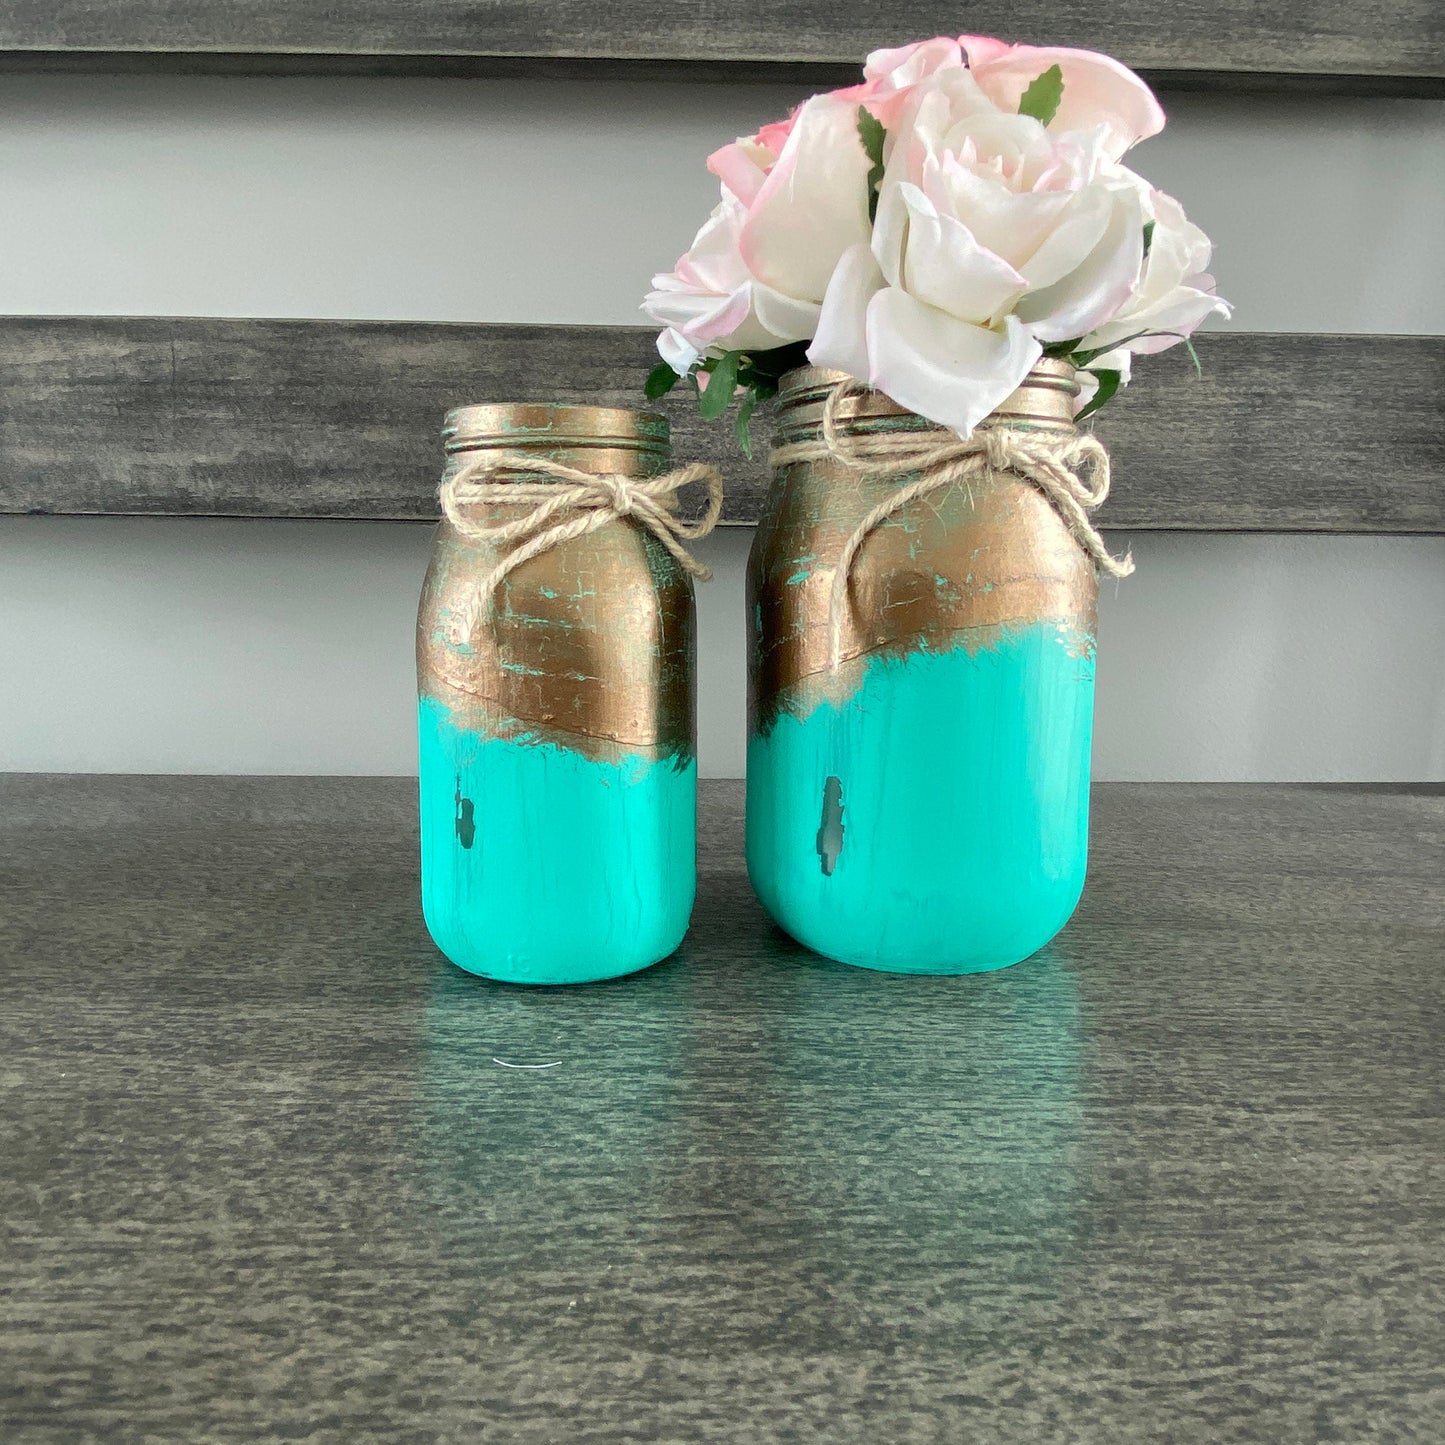 Painted Glass Jars - 2-pc Teal and Gold Glass Jar Set